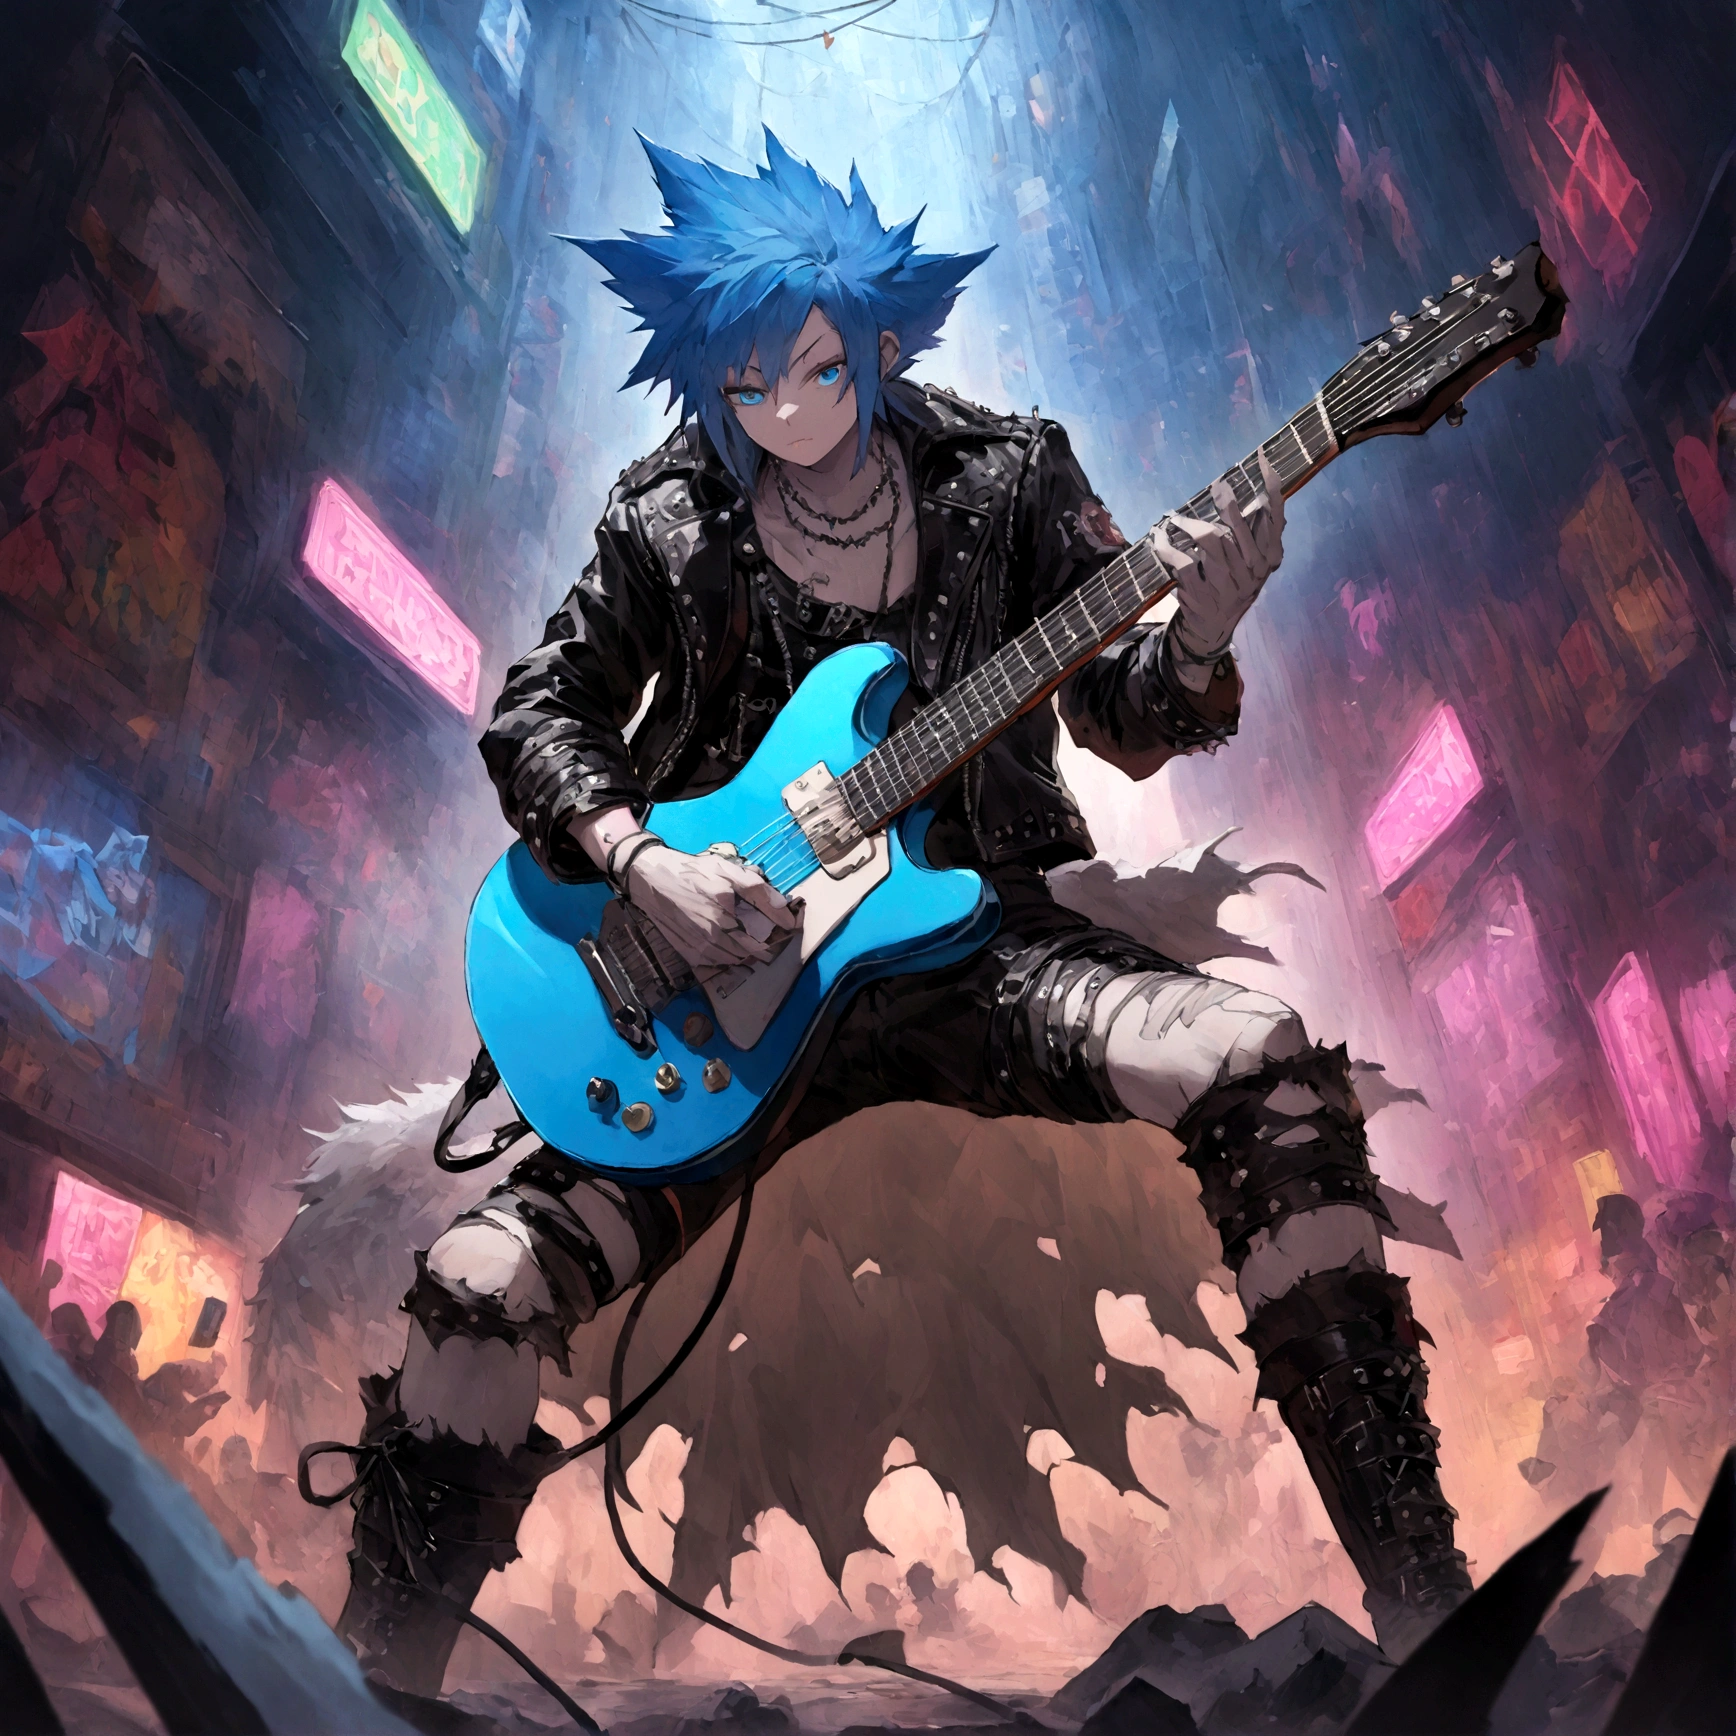 a white werewolf with blue eyes wearing a punk outfit playing the lead guitar in a band, has blue mowhawk, has leather patched jacket, wearing torn boots, shredding on guitar, many multi colored neon lights